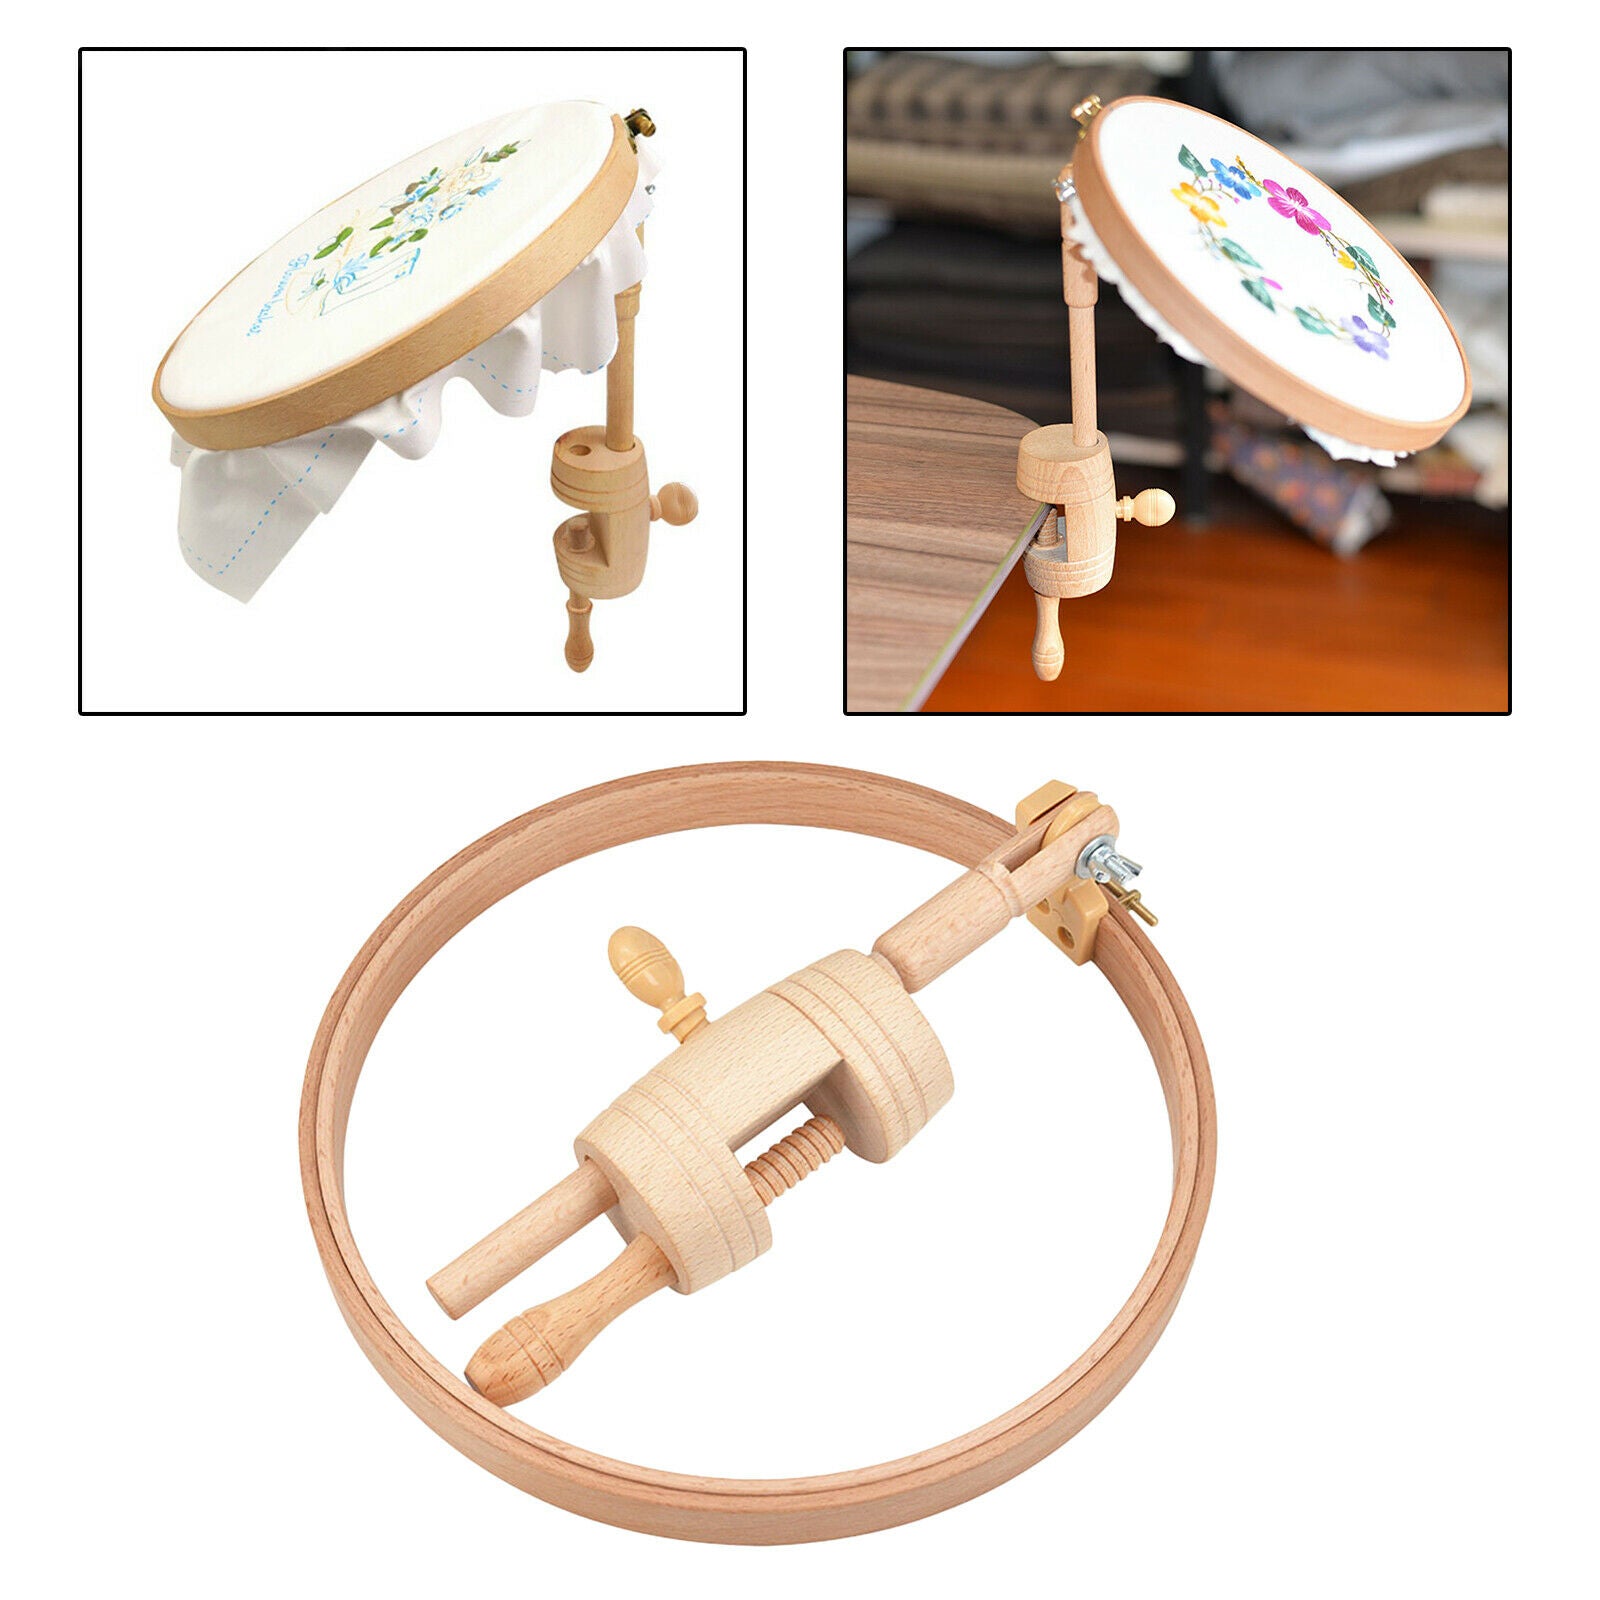 Wooden Adjustable Embroidery Hoop Holder Stand Cross Stitch Rack Sewing Tool